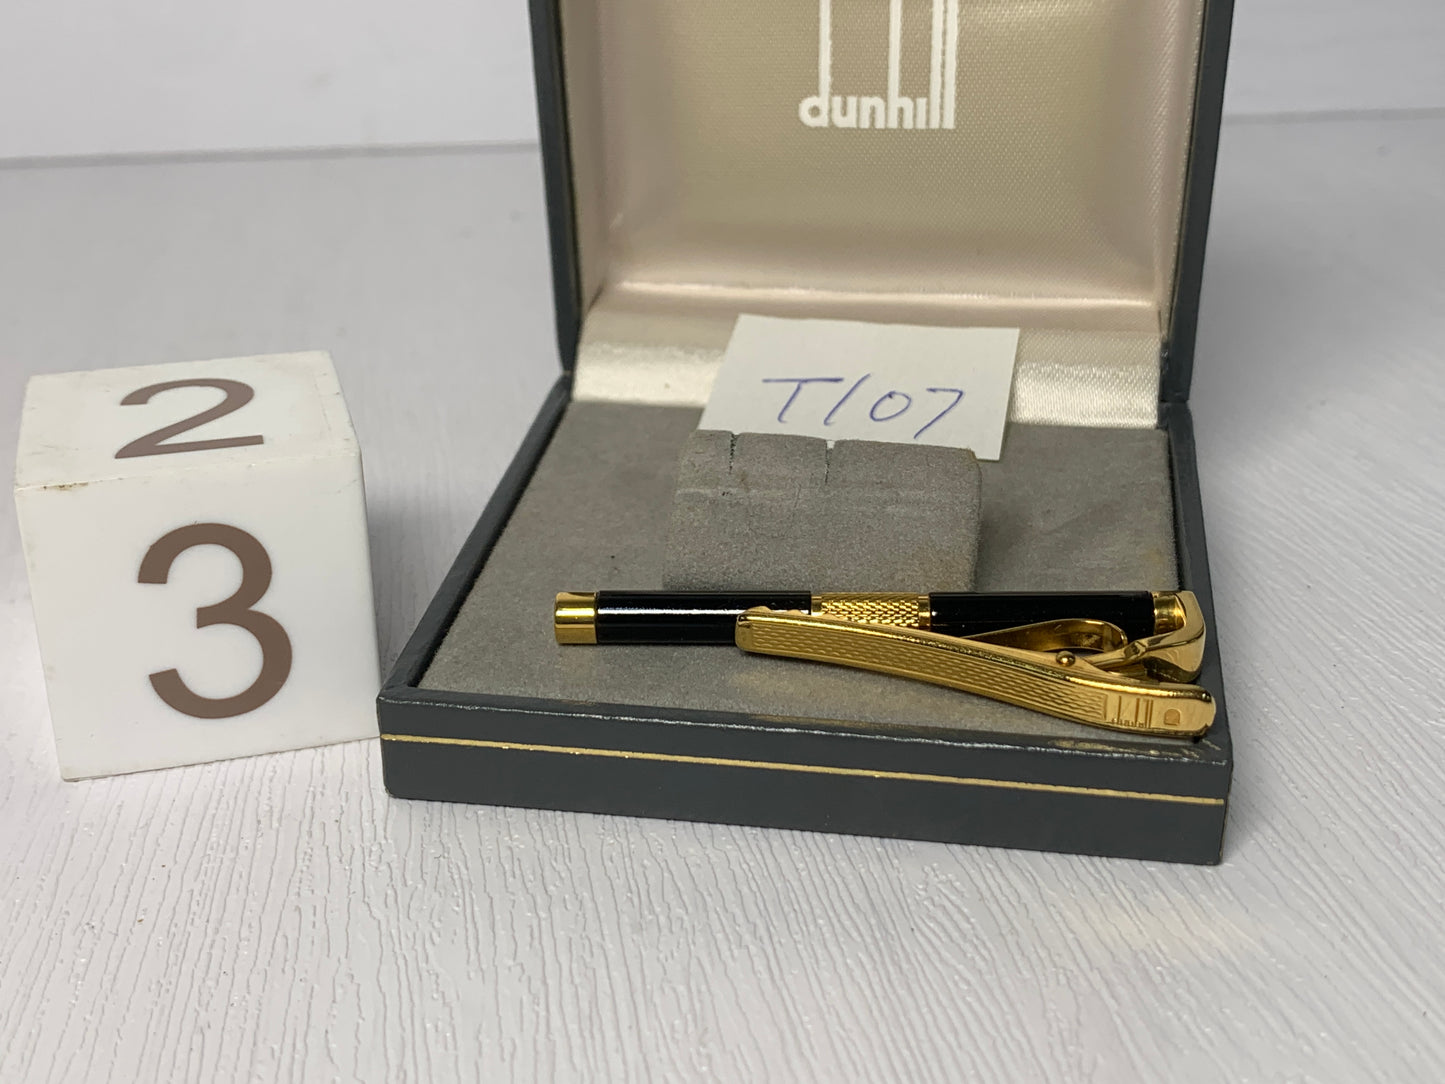 Vintage Gold tone Tie clip dunhill  cufflinks with box  - 3MAR